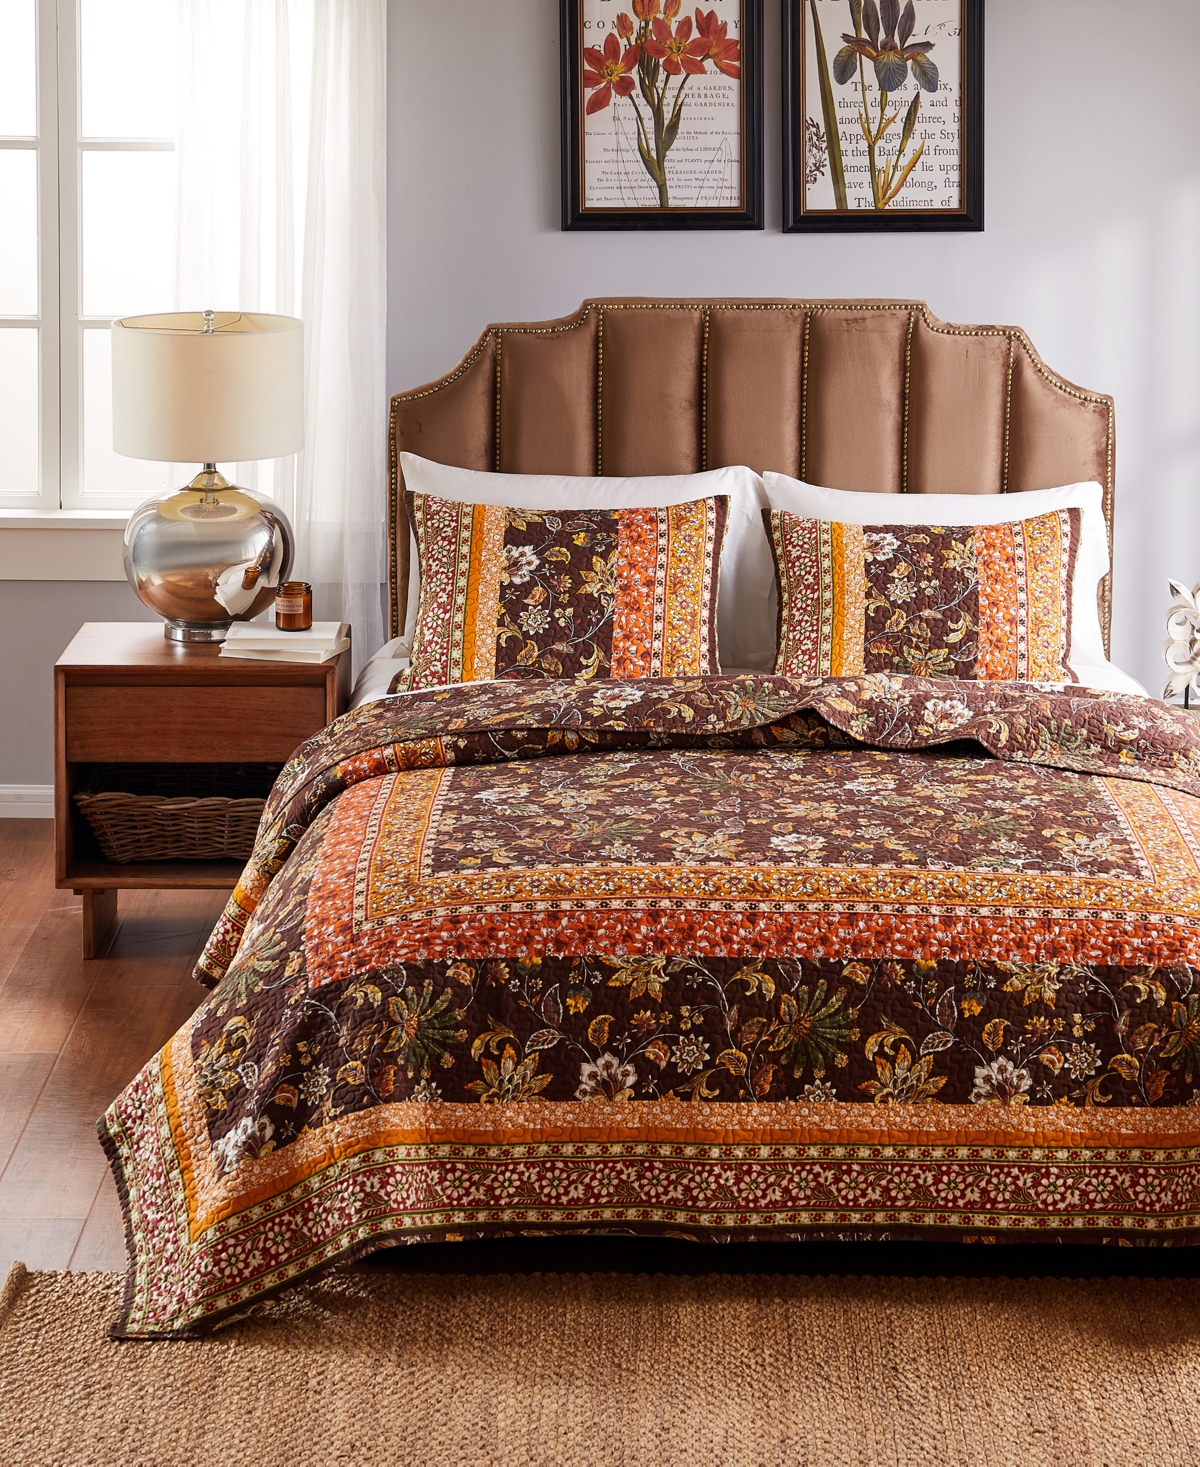 Greenland Home Fashions Audrey Floral Print 3 Piece Quilt Set, King/california King In Chocolate